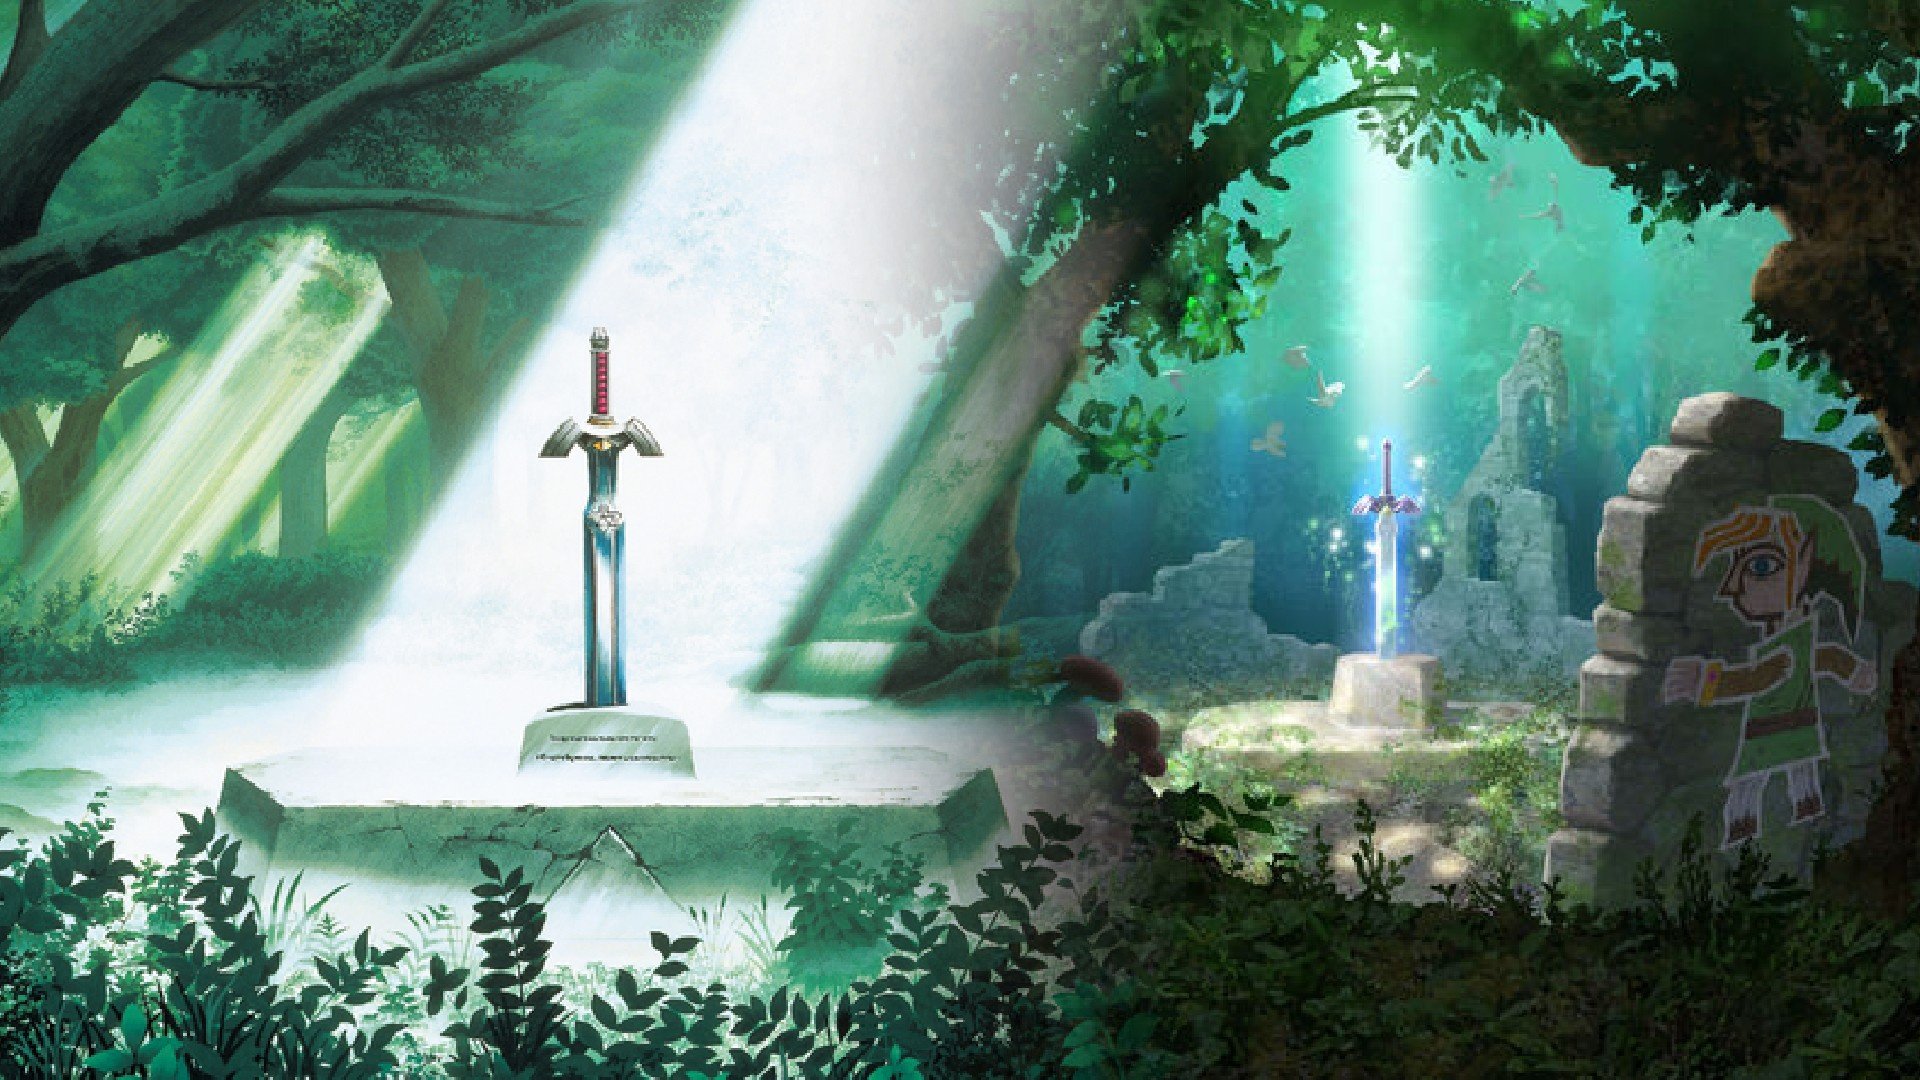 download master sword party city